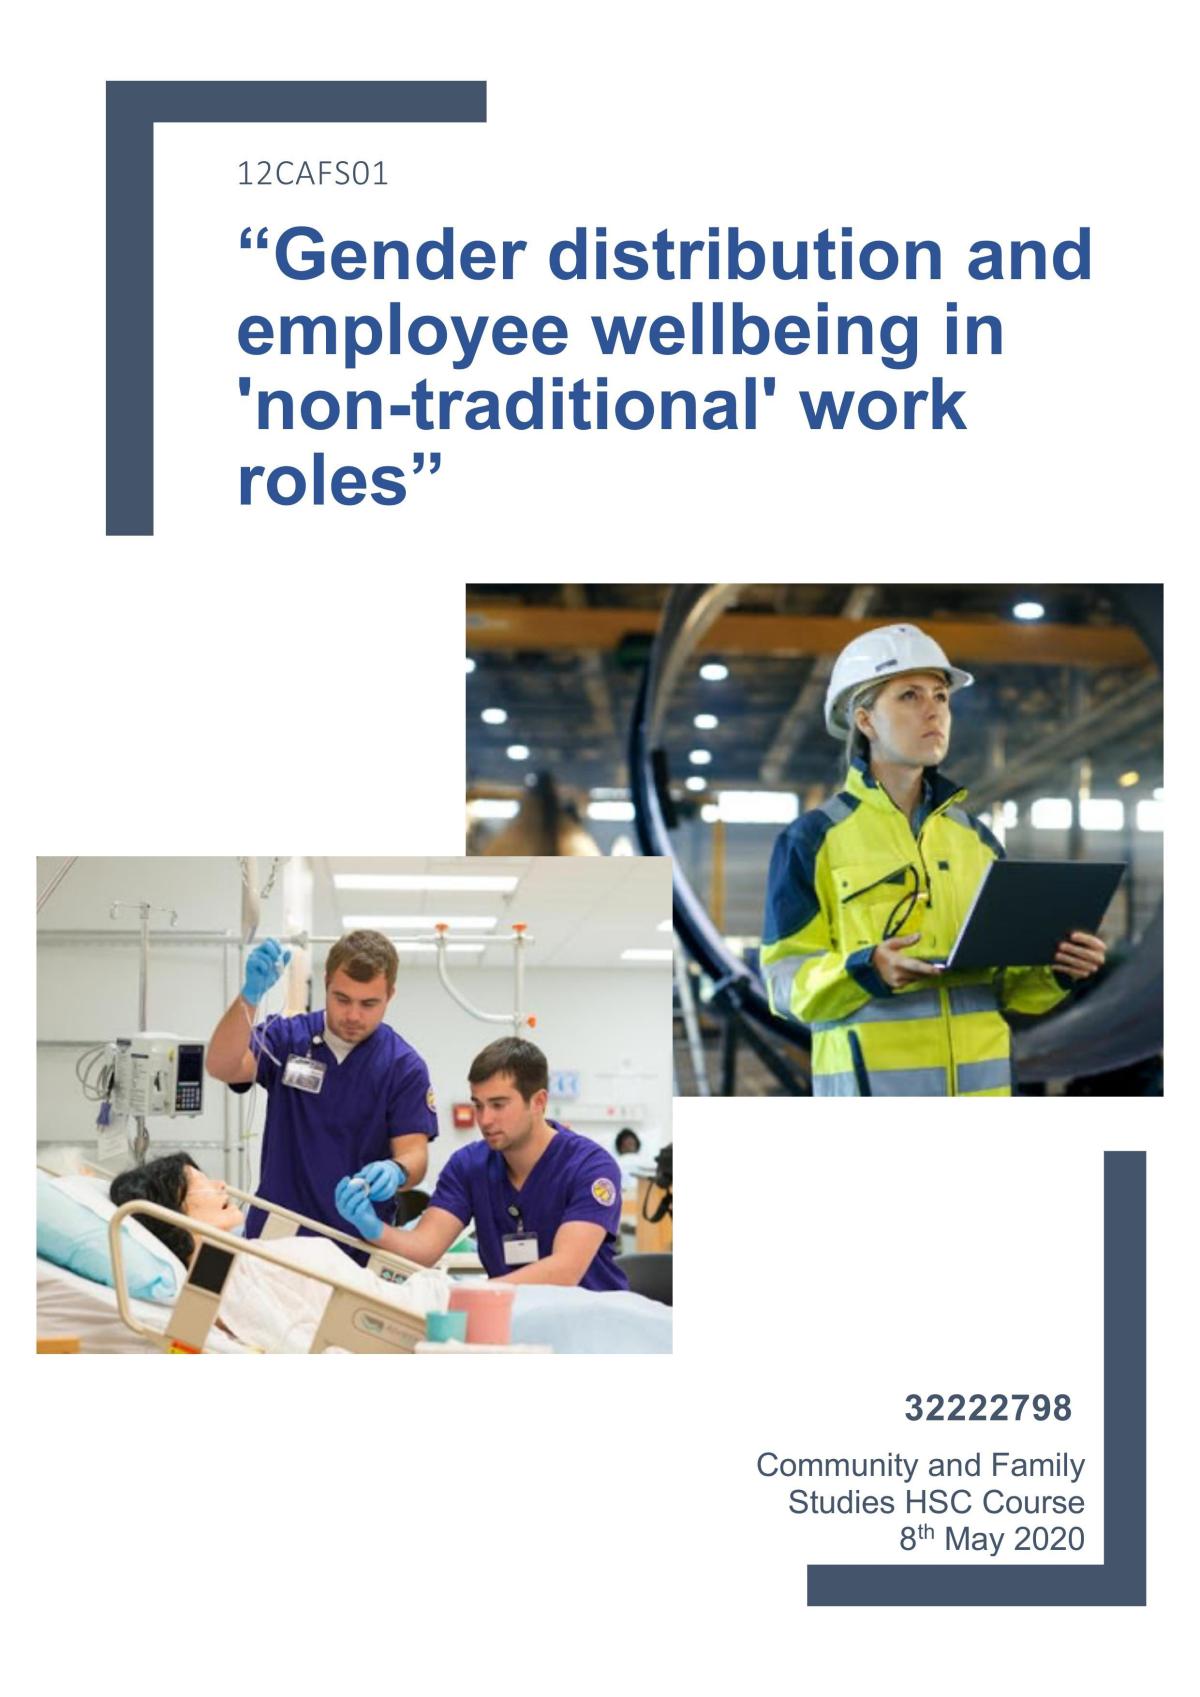 IPR - “Gender distribution and employee wellbeing in 'non-traditional' work roles” - Page 1